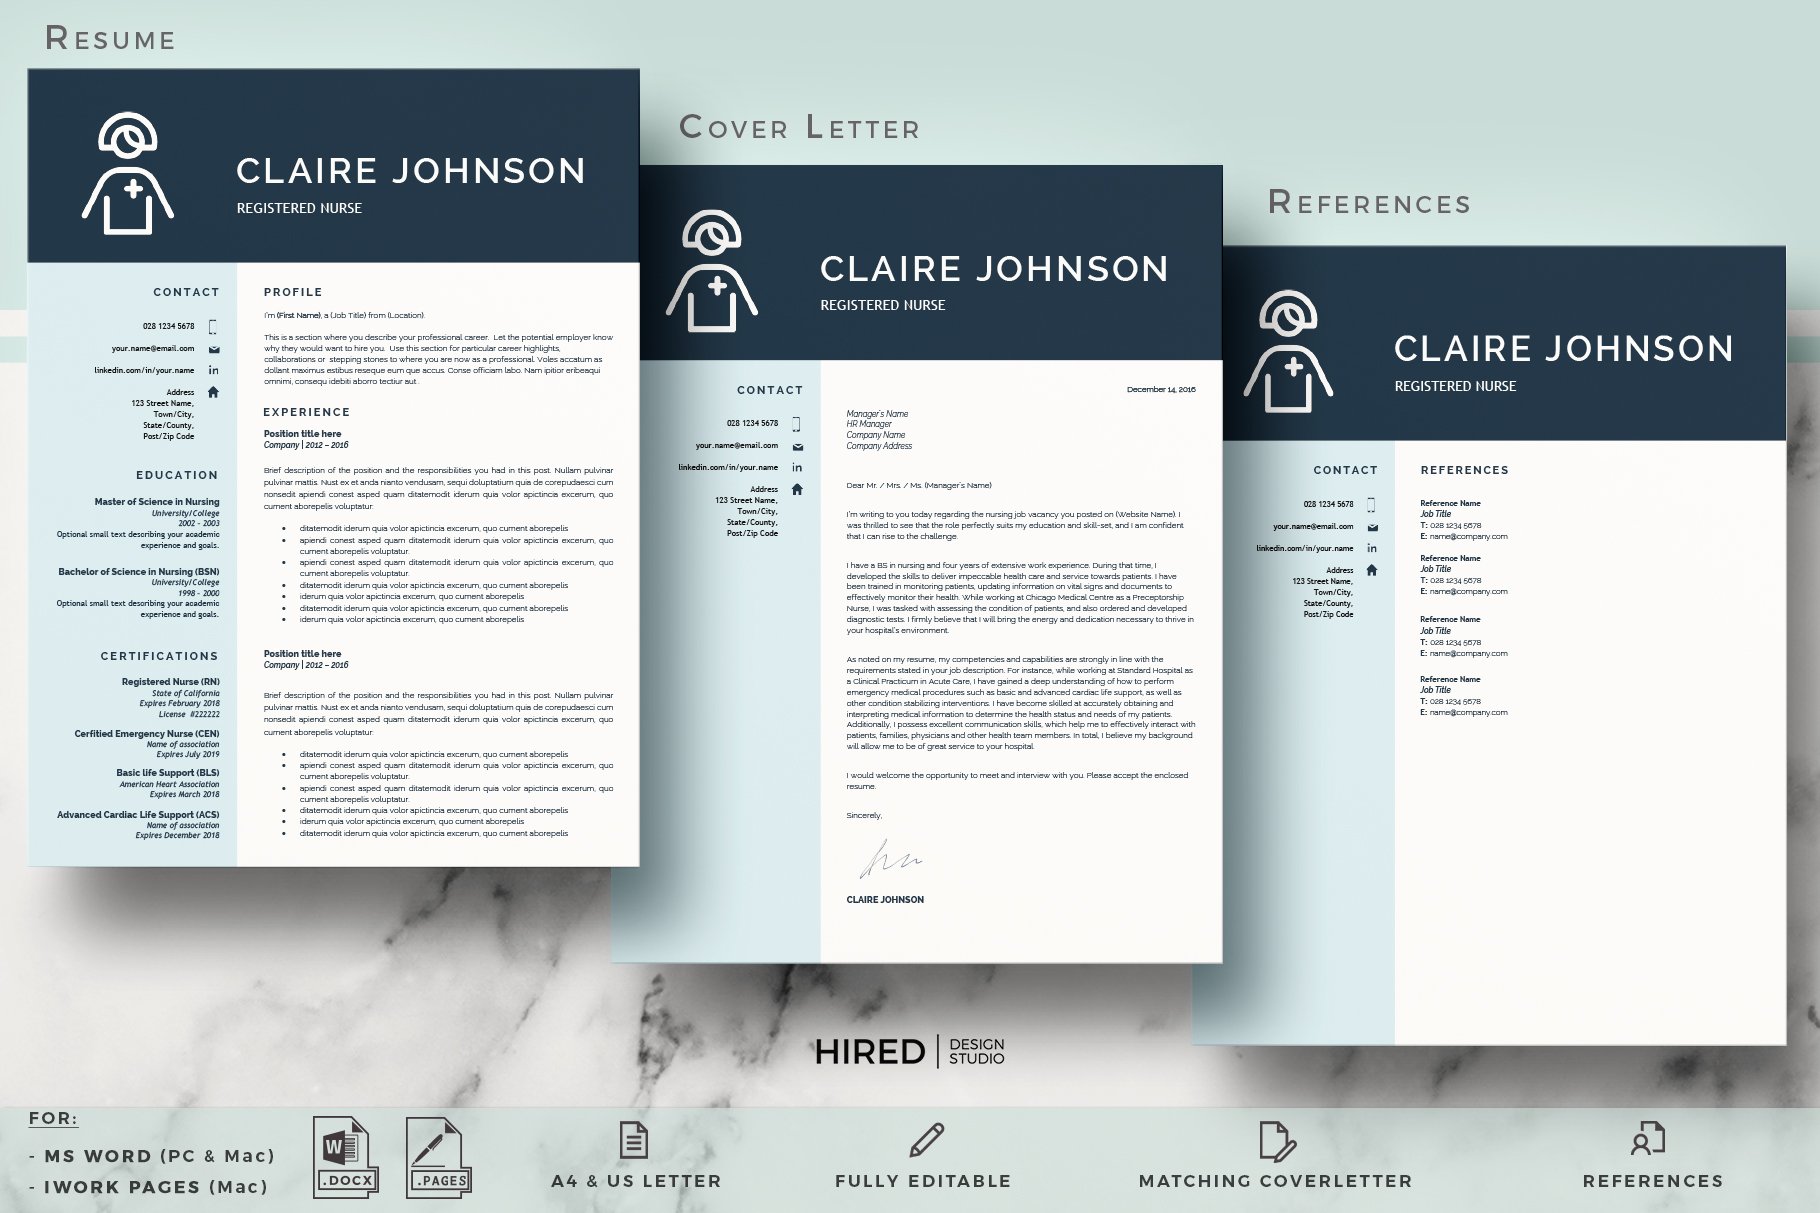 Three resume templates on a marble background.